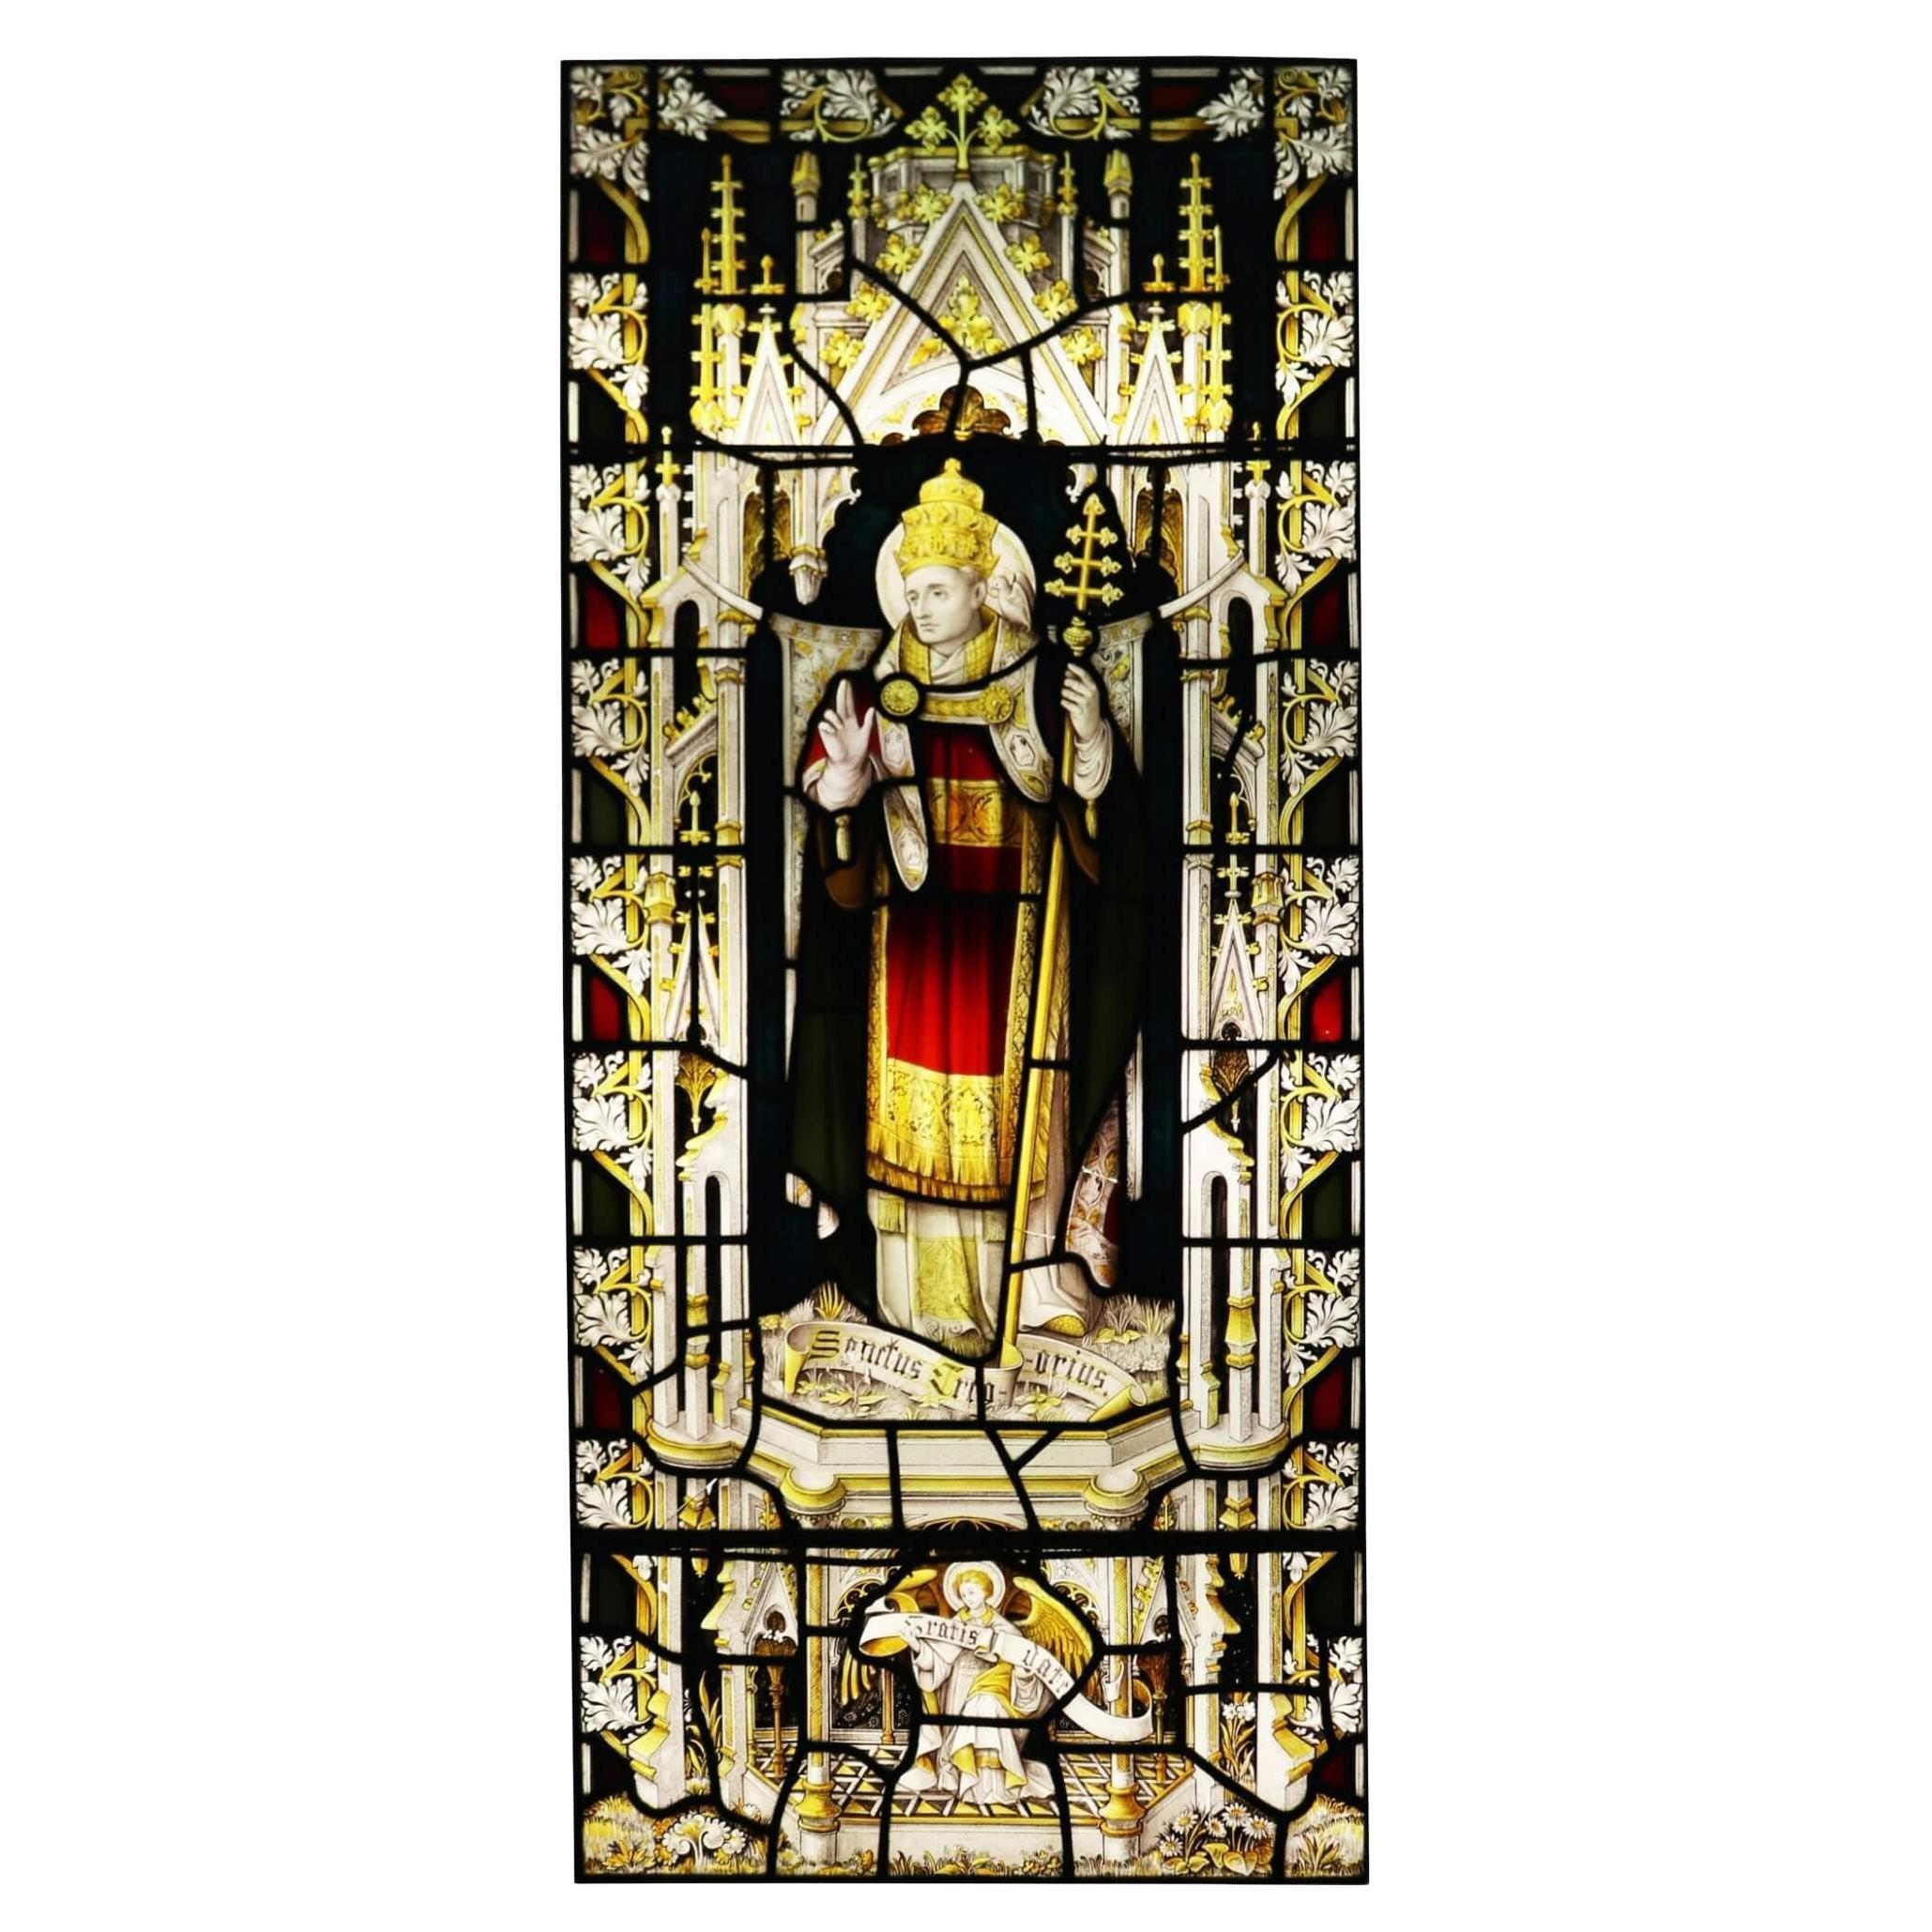 Antique Religious Stained Glass Window of Saint Gregory